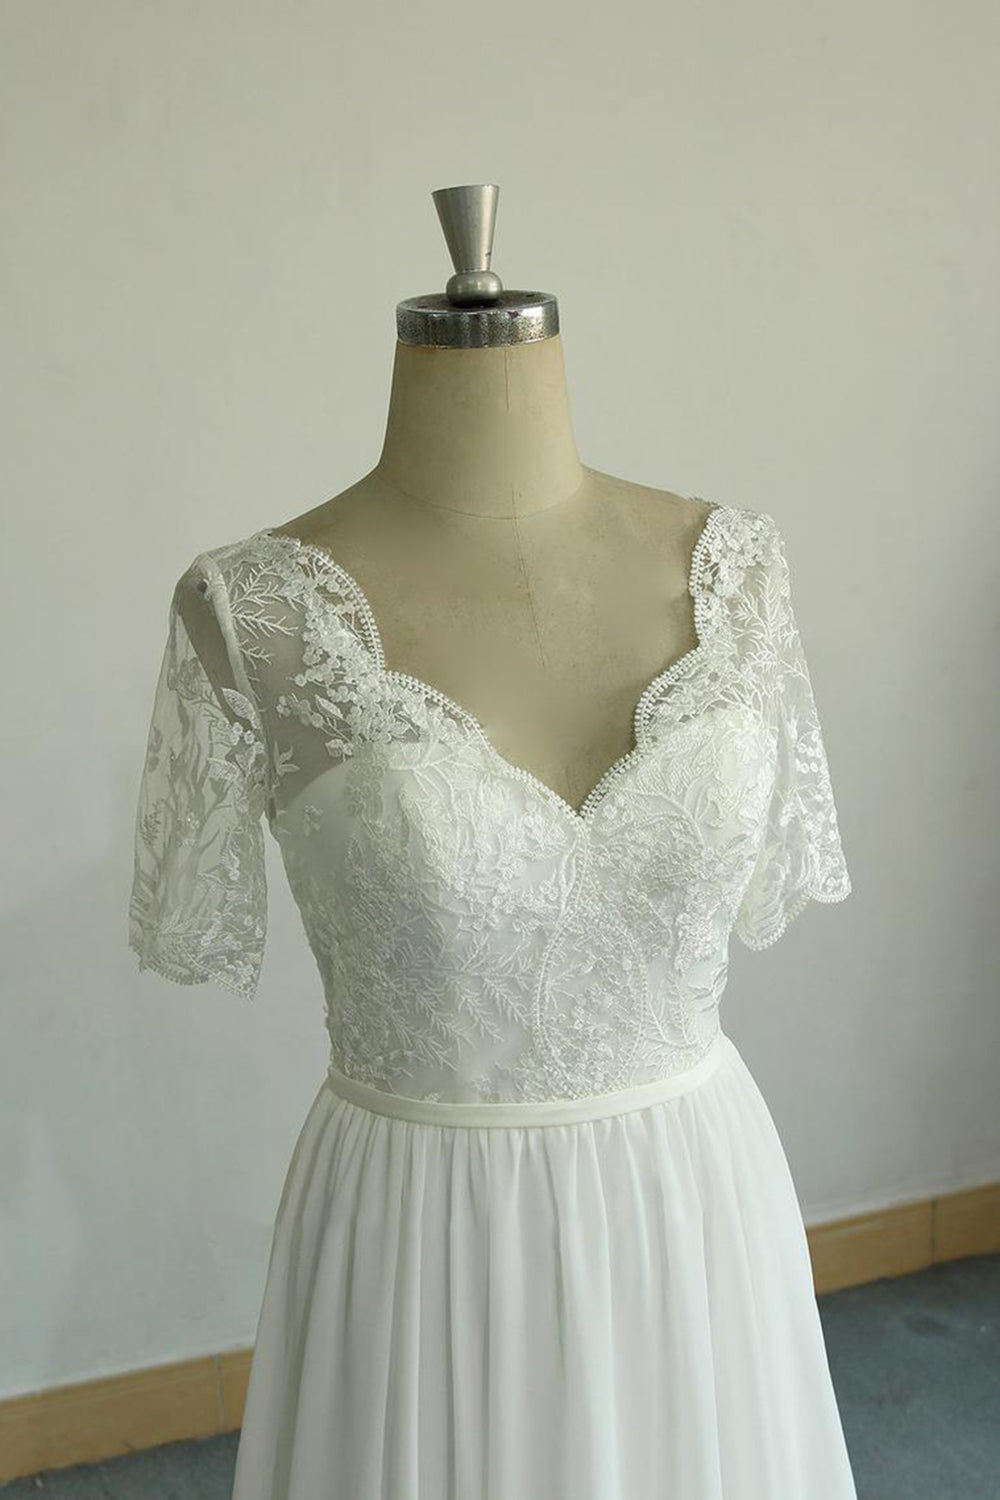 Affordable Halfsleeves V-neck Chiffon Wedding Dresses White A-line Ruffles Bridal Gowns Online-27dress